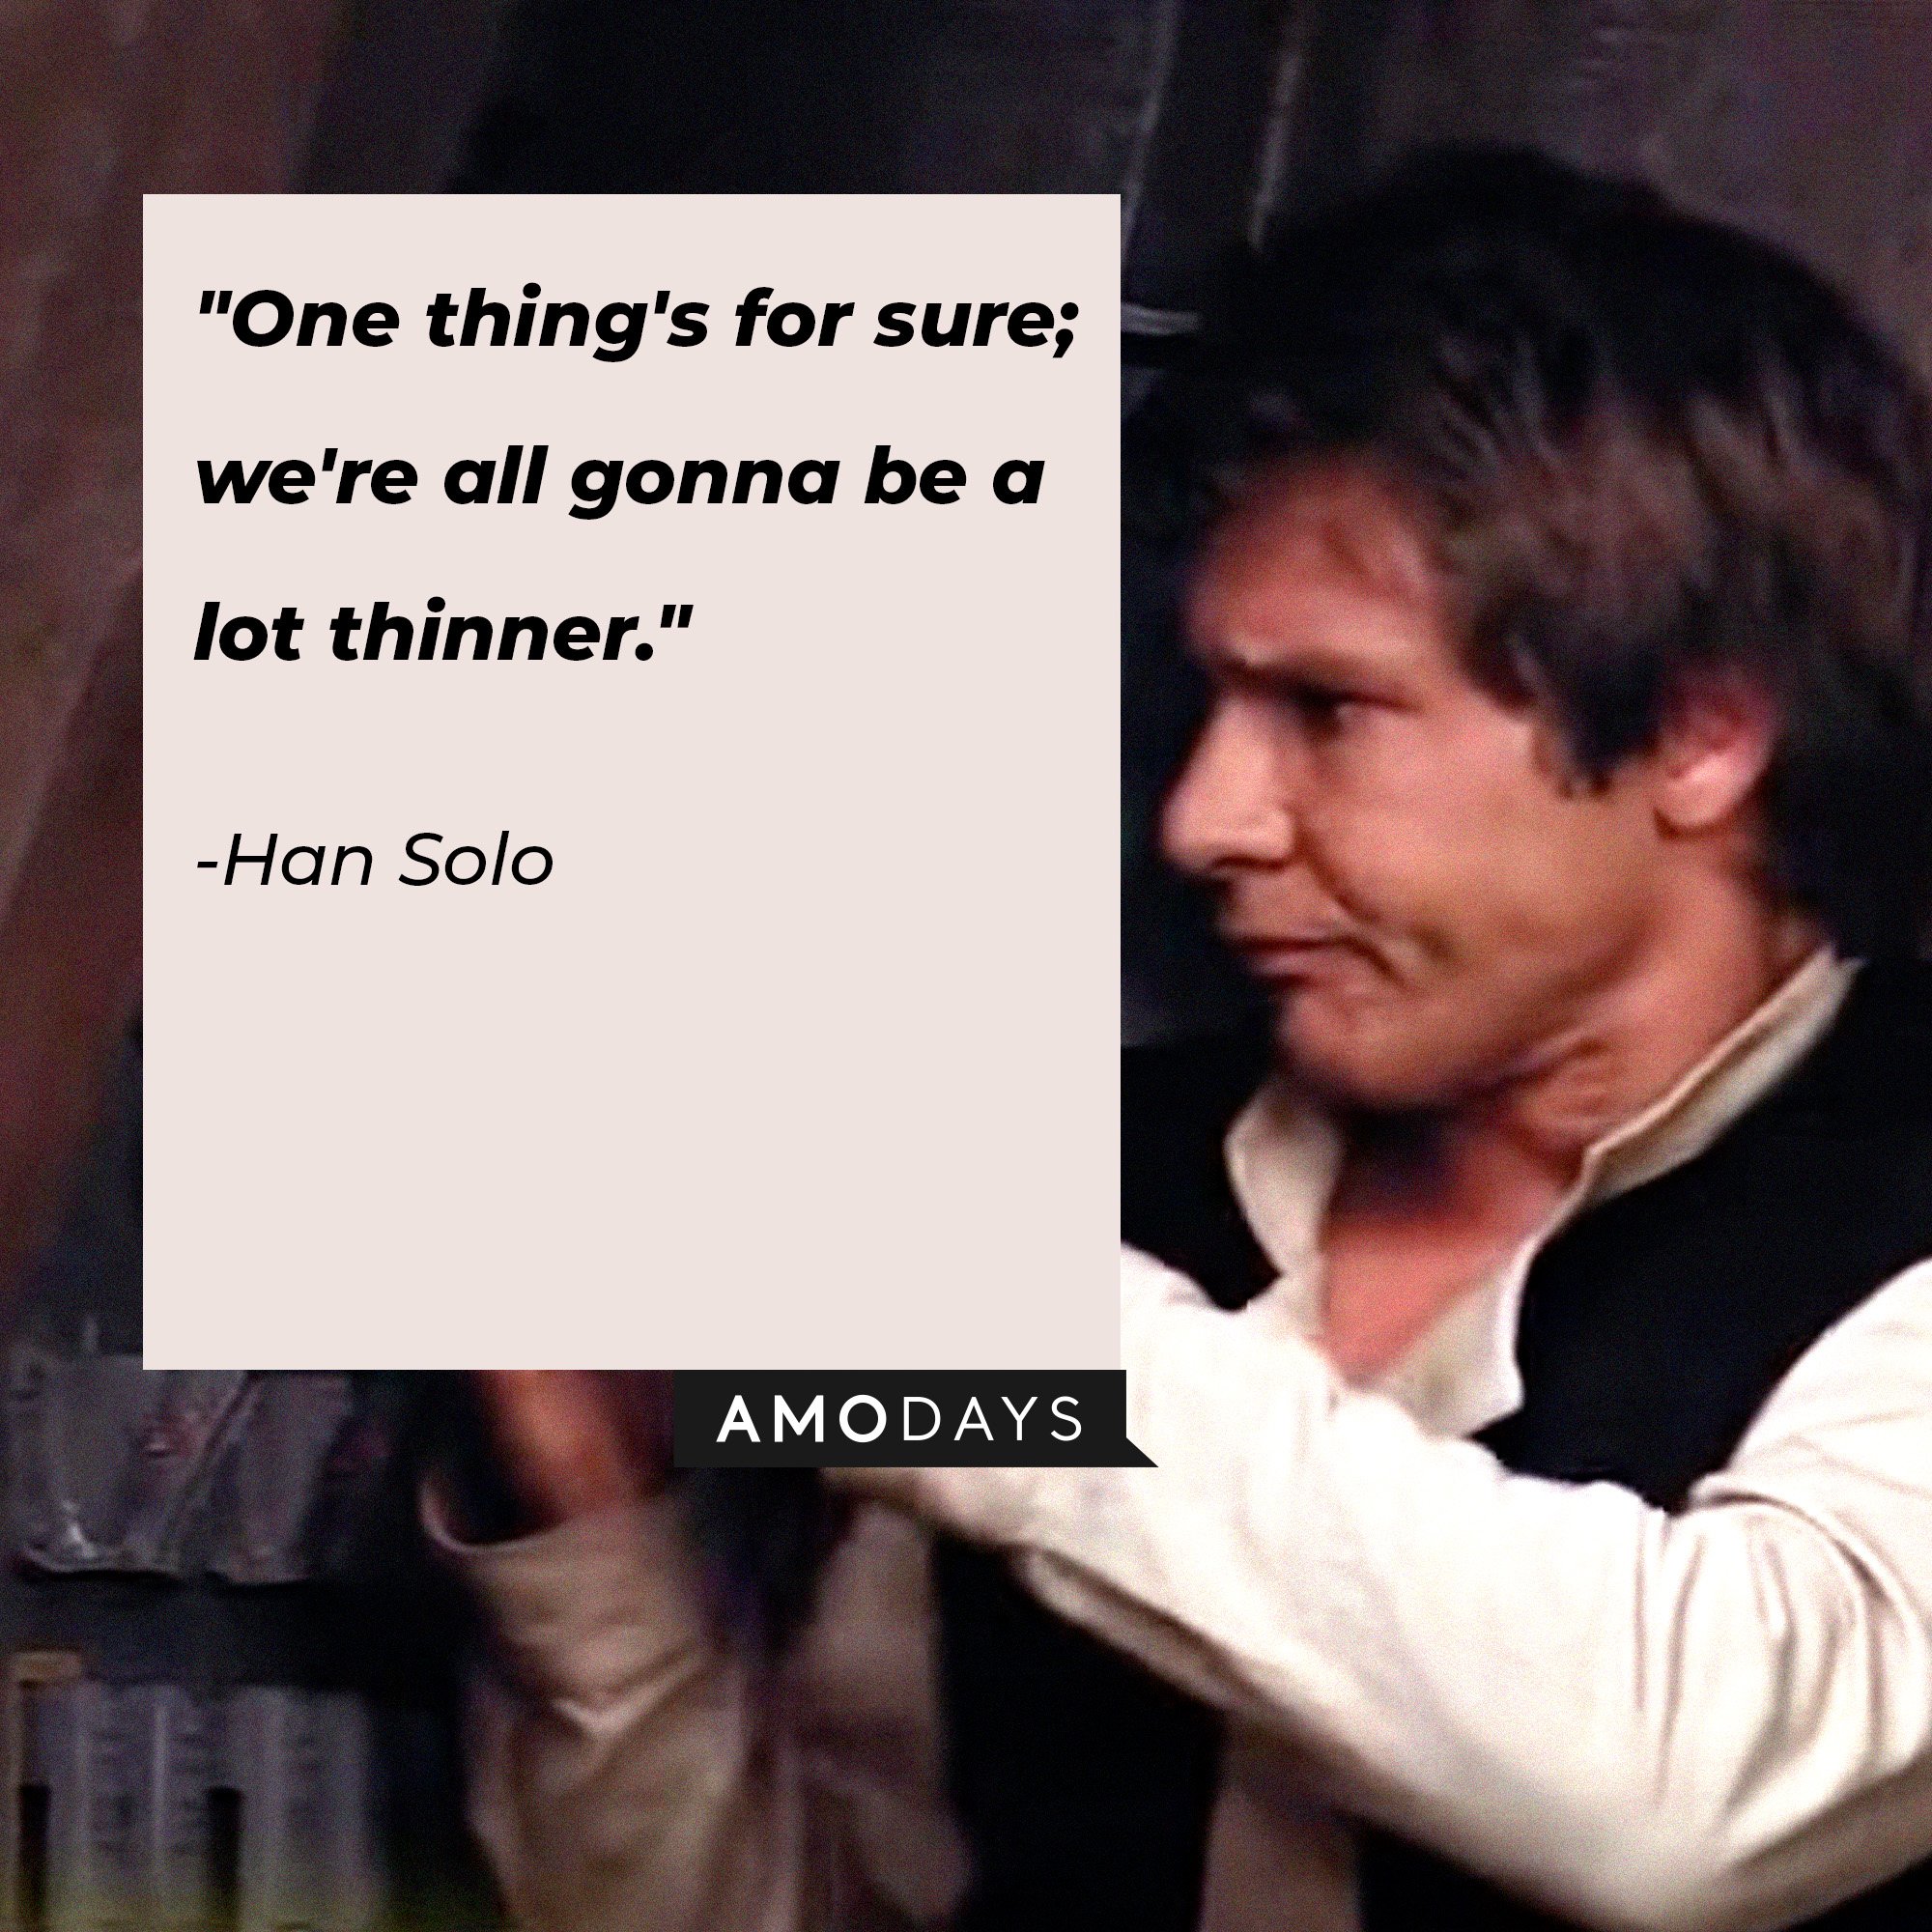 Han Solo’s quote: "One thing's for sure; we're all gonna be a lot thinner." | Image: AmoDays